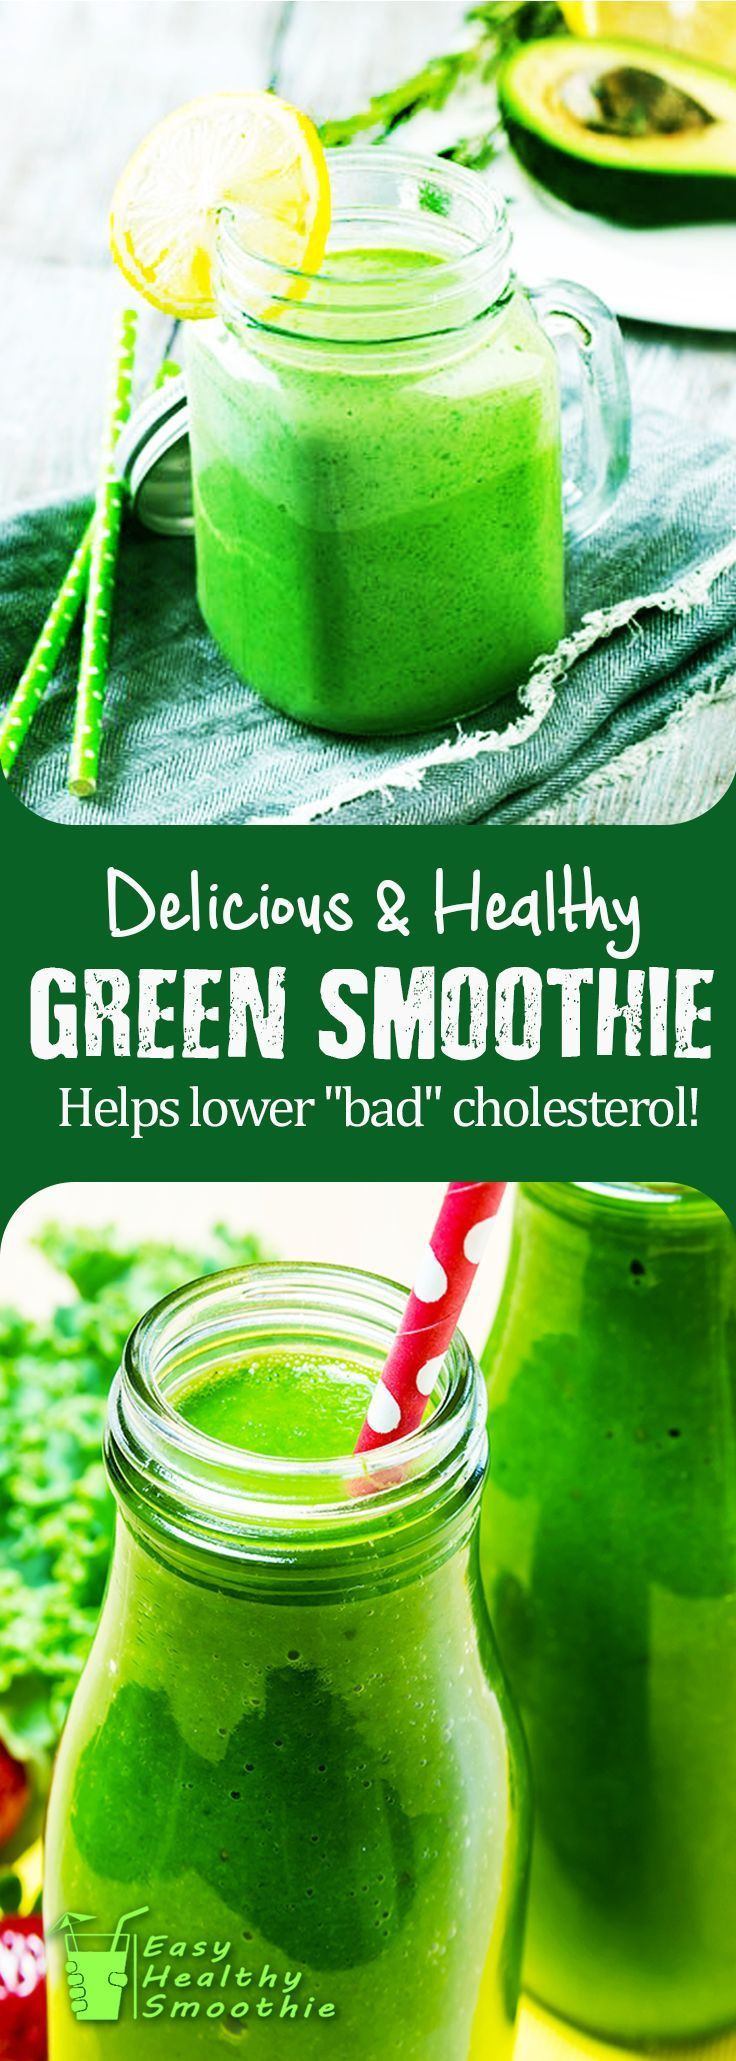 Smoothies To Lower Cholesterol
 7 Smoothie Recipes to Lower Your Cholesterol in 2019